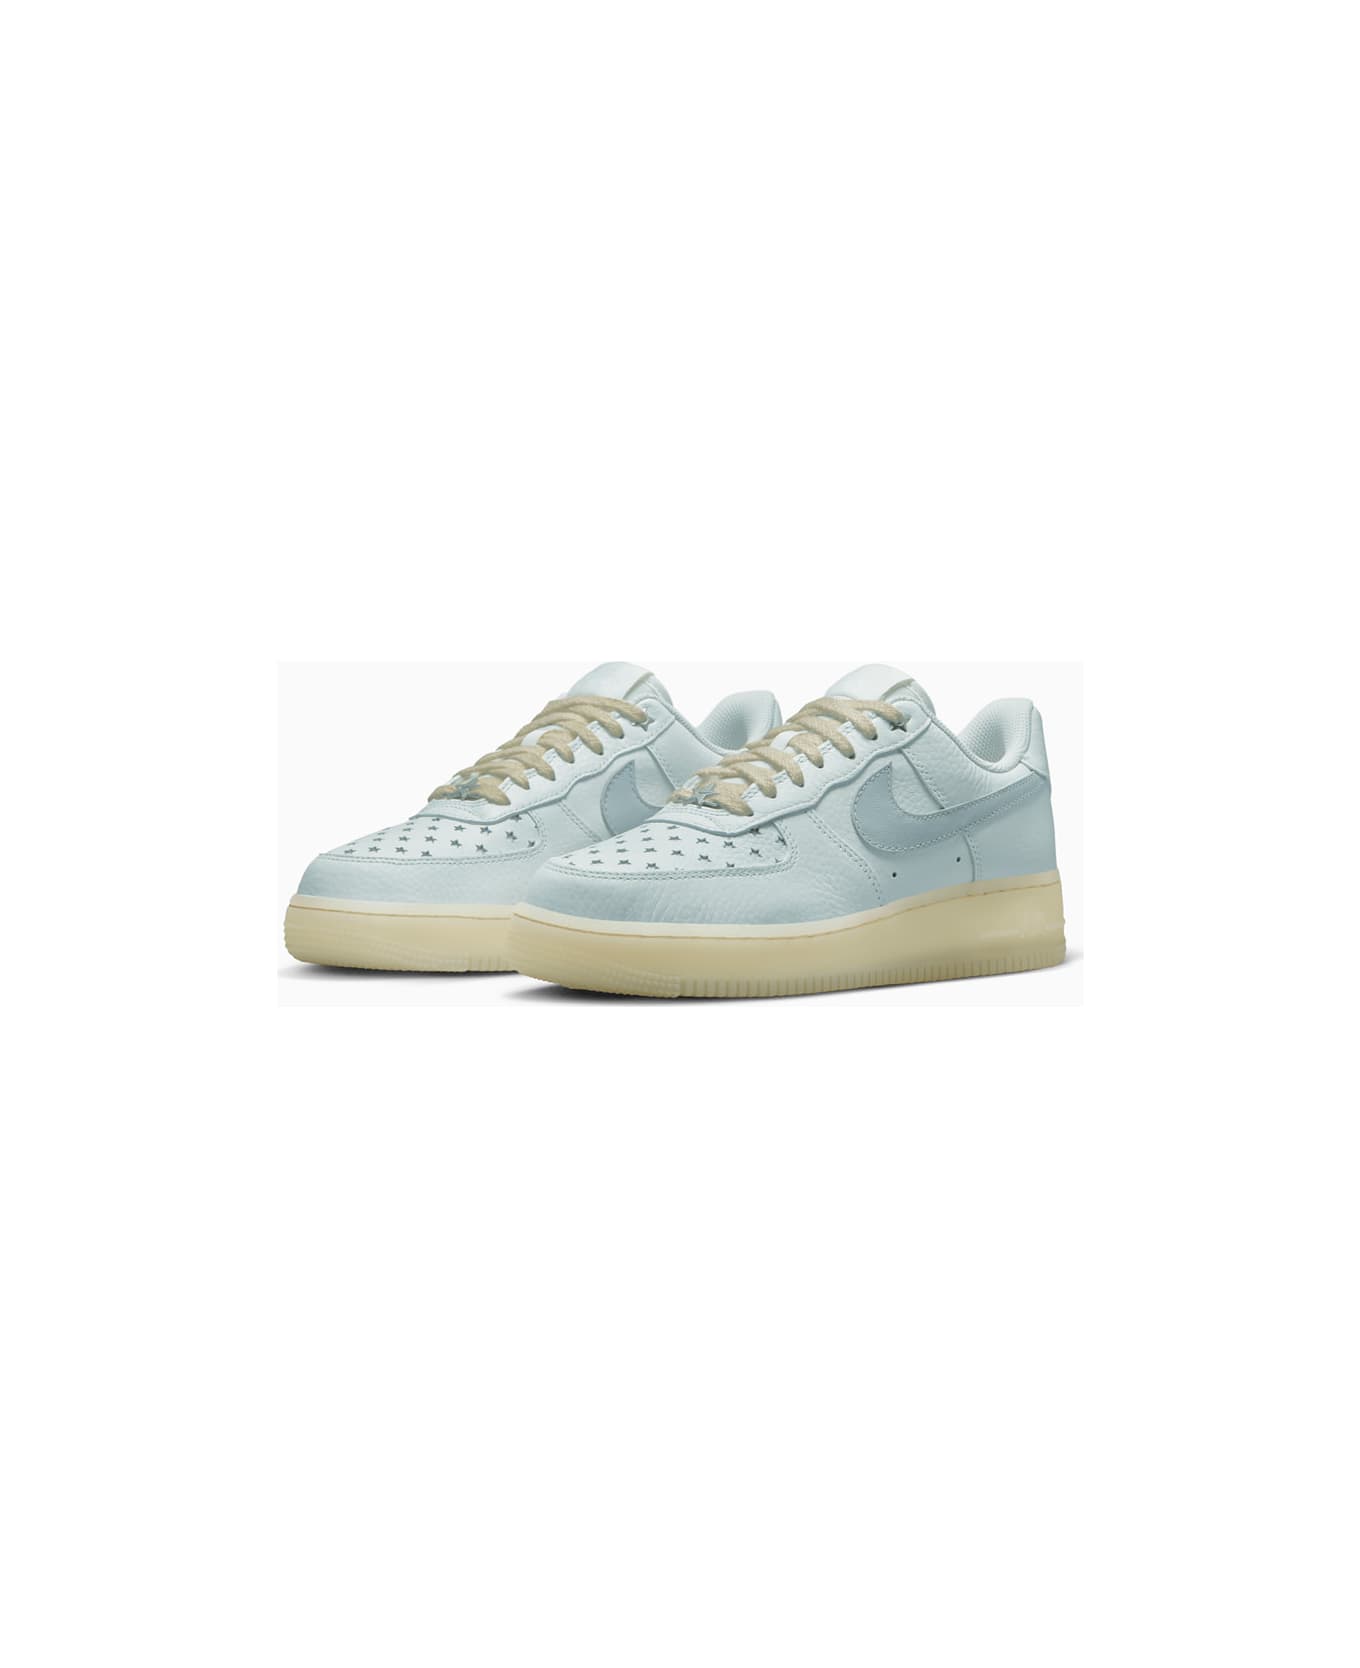 Nike Air Force 1 '07 Sneakers Fd0793-100 - White